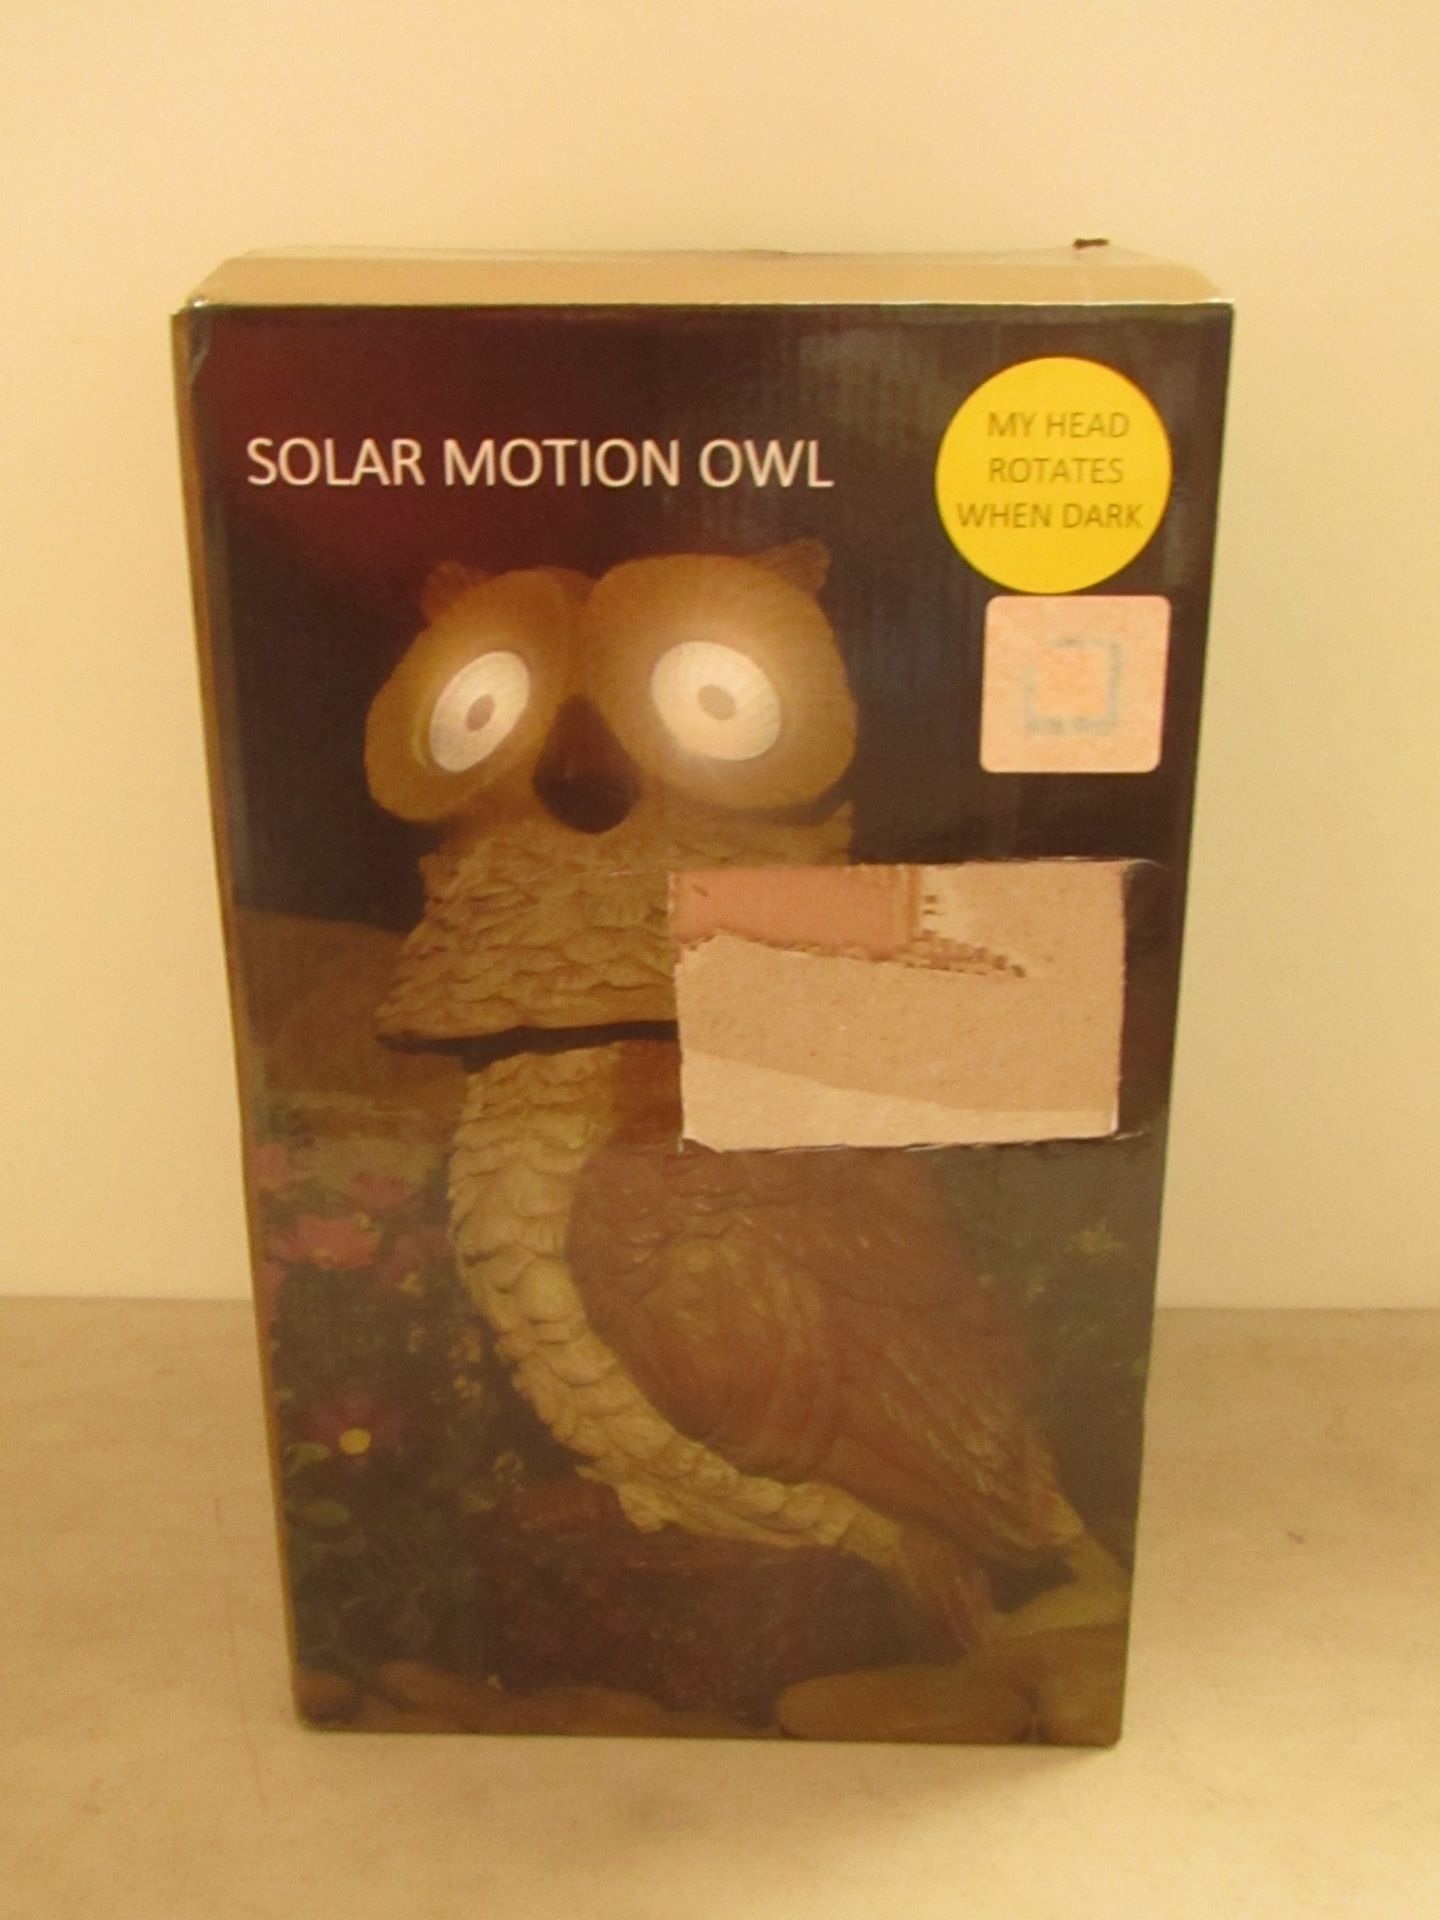 Solar motion owl, unchecked and boxed.